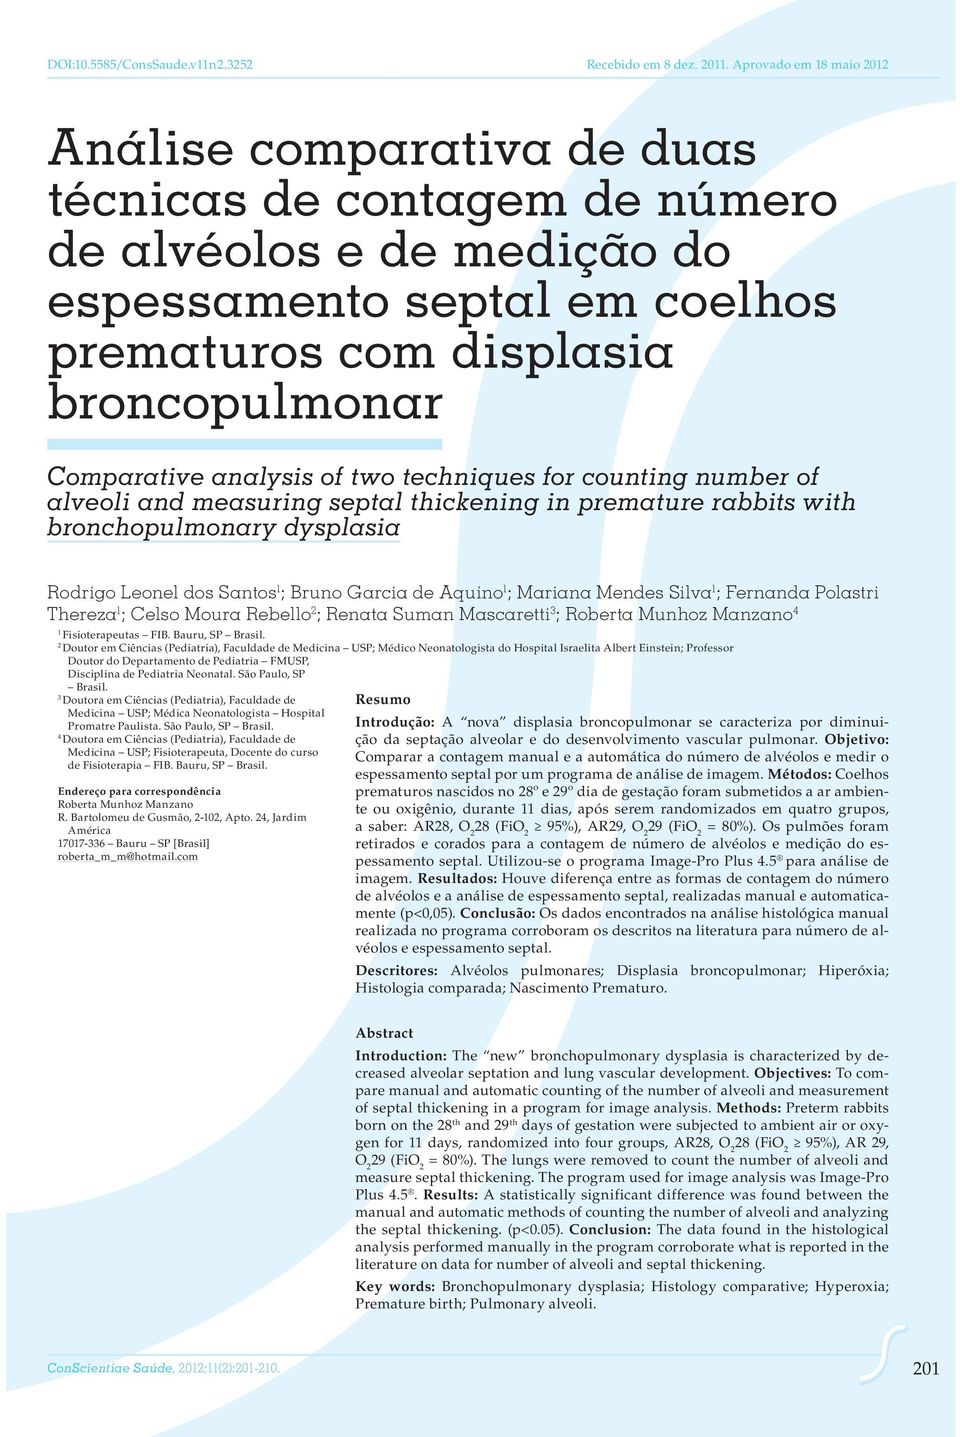 analysis of two techniques for counting number of alveoli and measuring septal thickening in premature rabbits with bronchopulmonary dysplasia Rodrigo Leonel dos Santos 1 ; Bruno Garcia de Aquino 1 ;